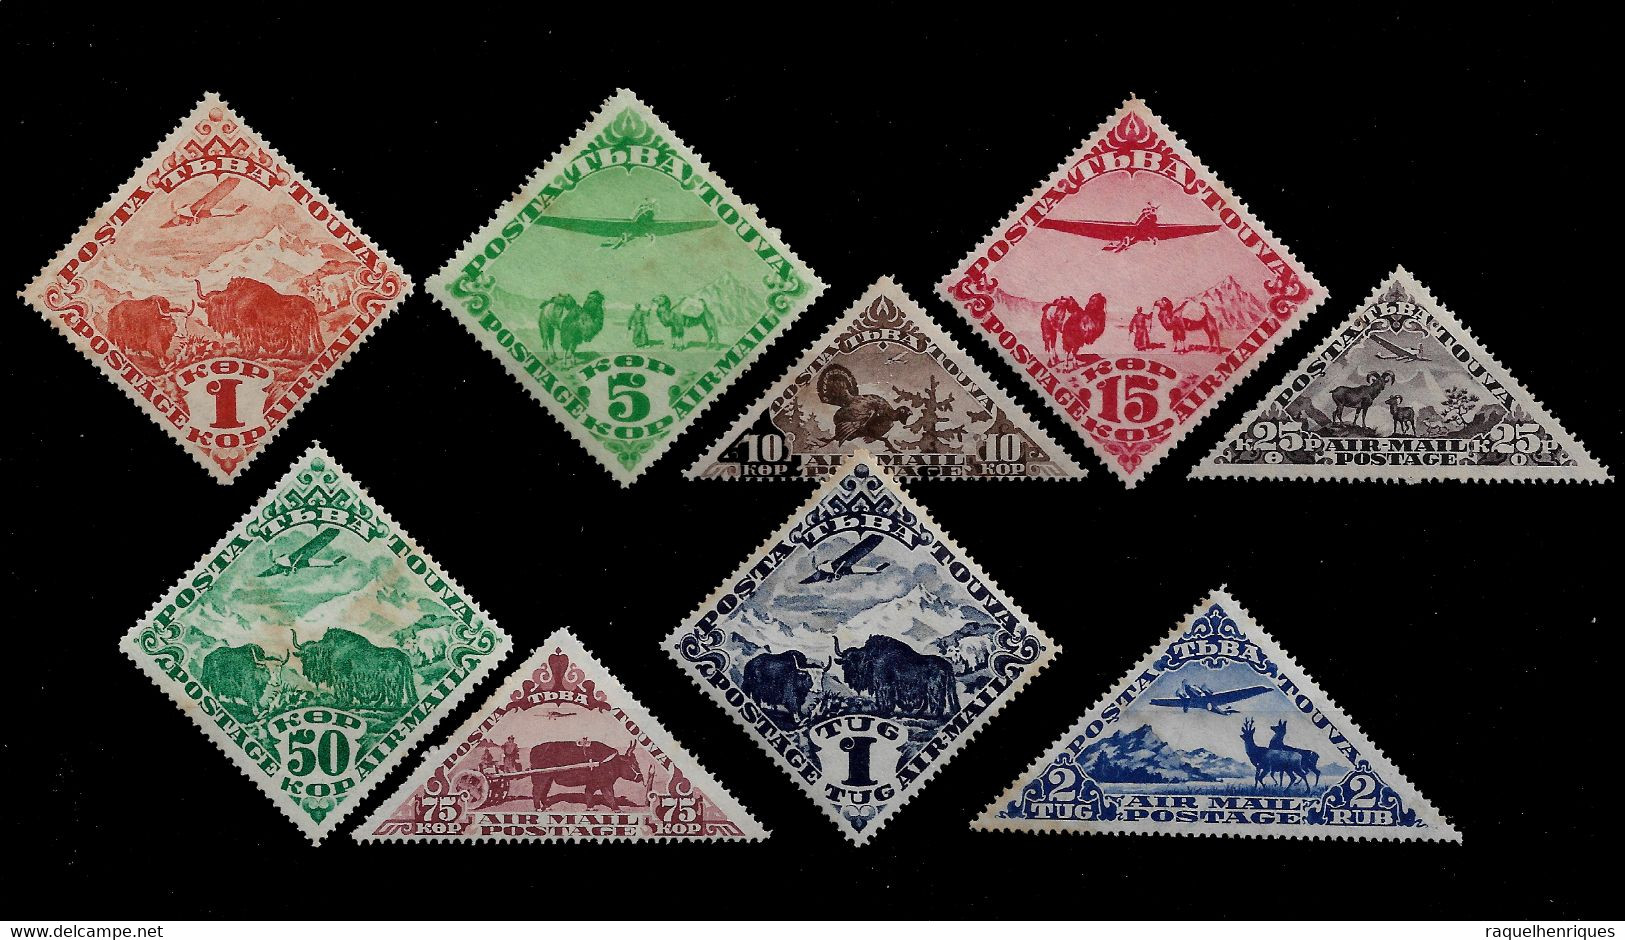 RUSSIA TANNU TOUVA STAMP - 1934 Airmail - Airplanes And Animals SET MH (BA5#301) - Tuva